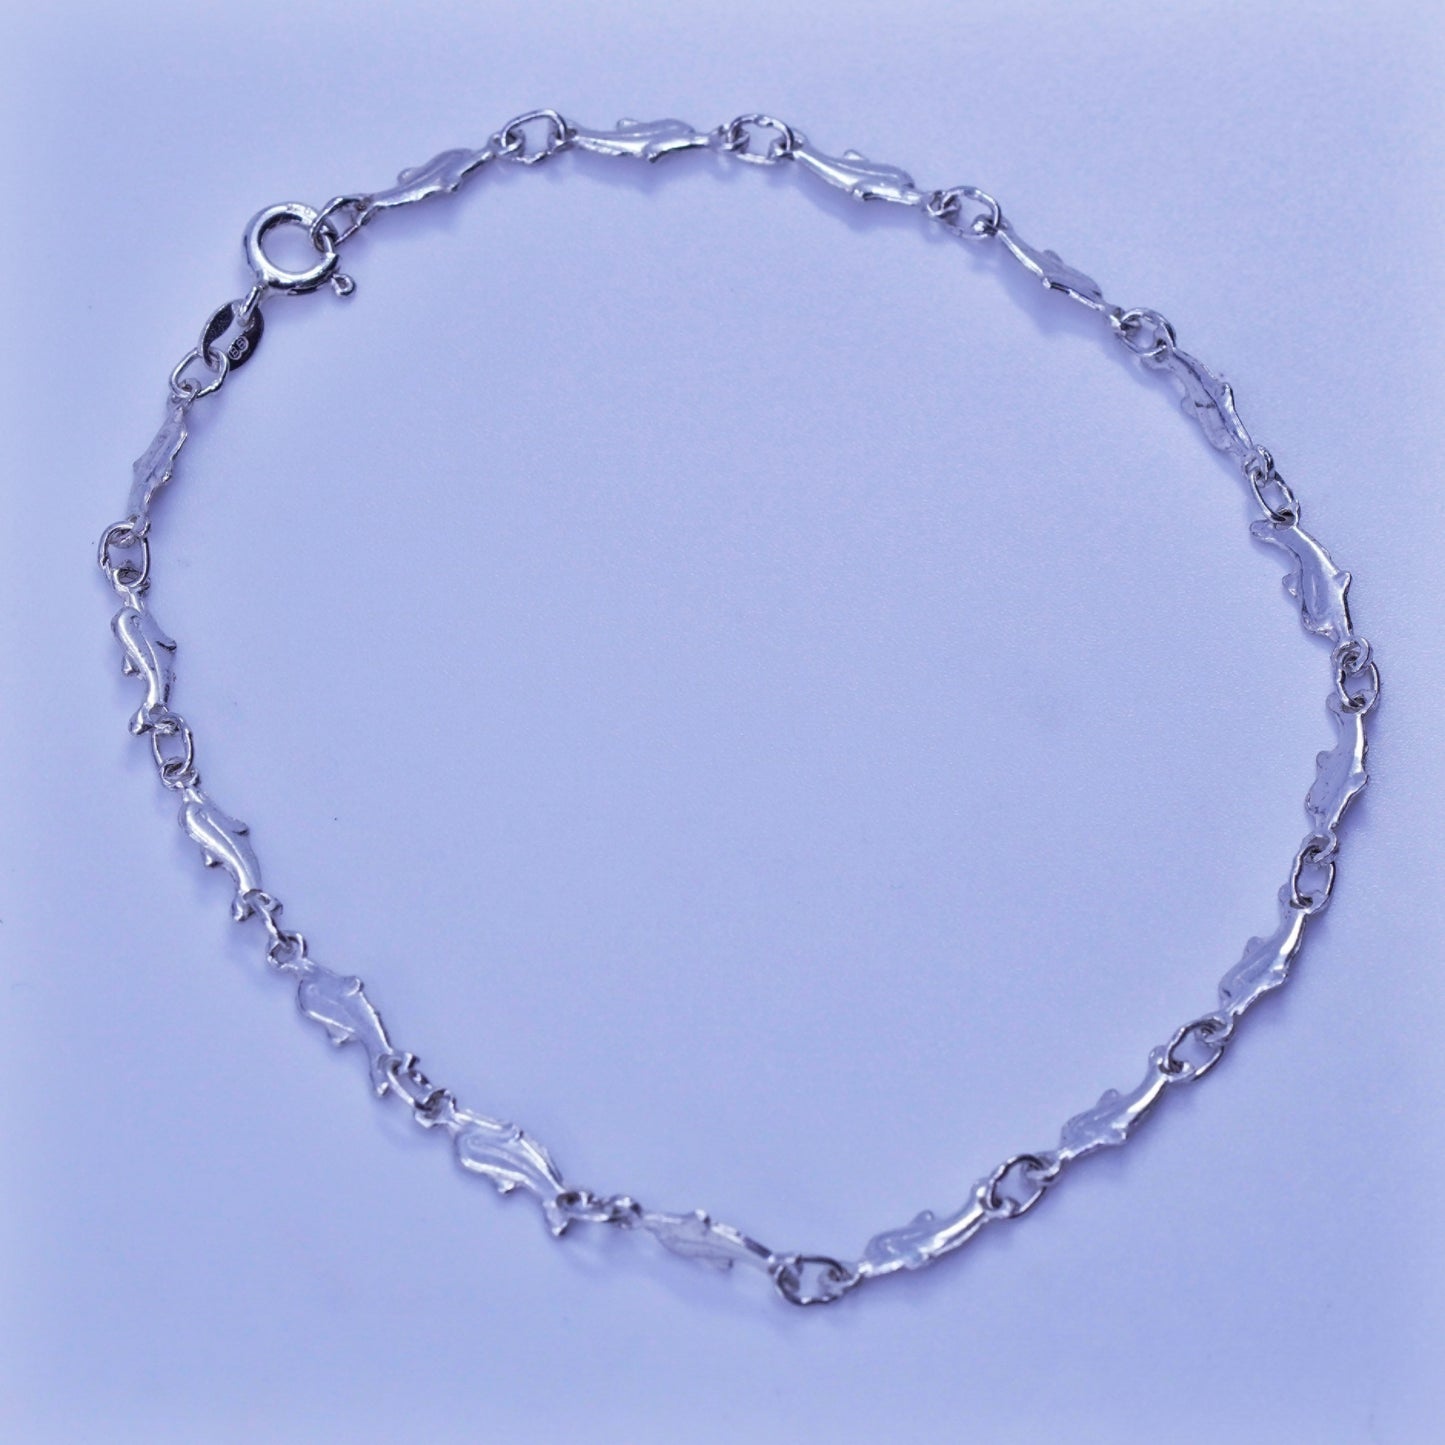 8.75”, Vintage Italy Sterling 925 silver handmade bracelet, dolphin link chain